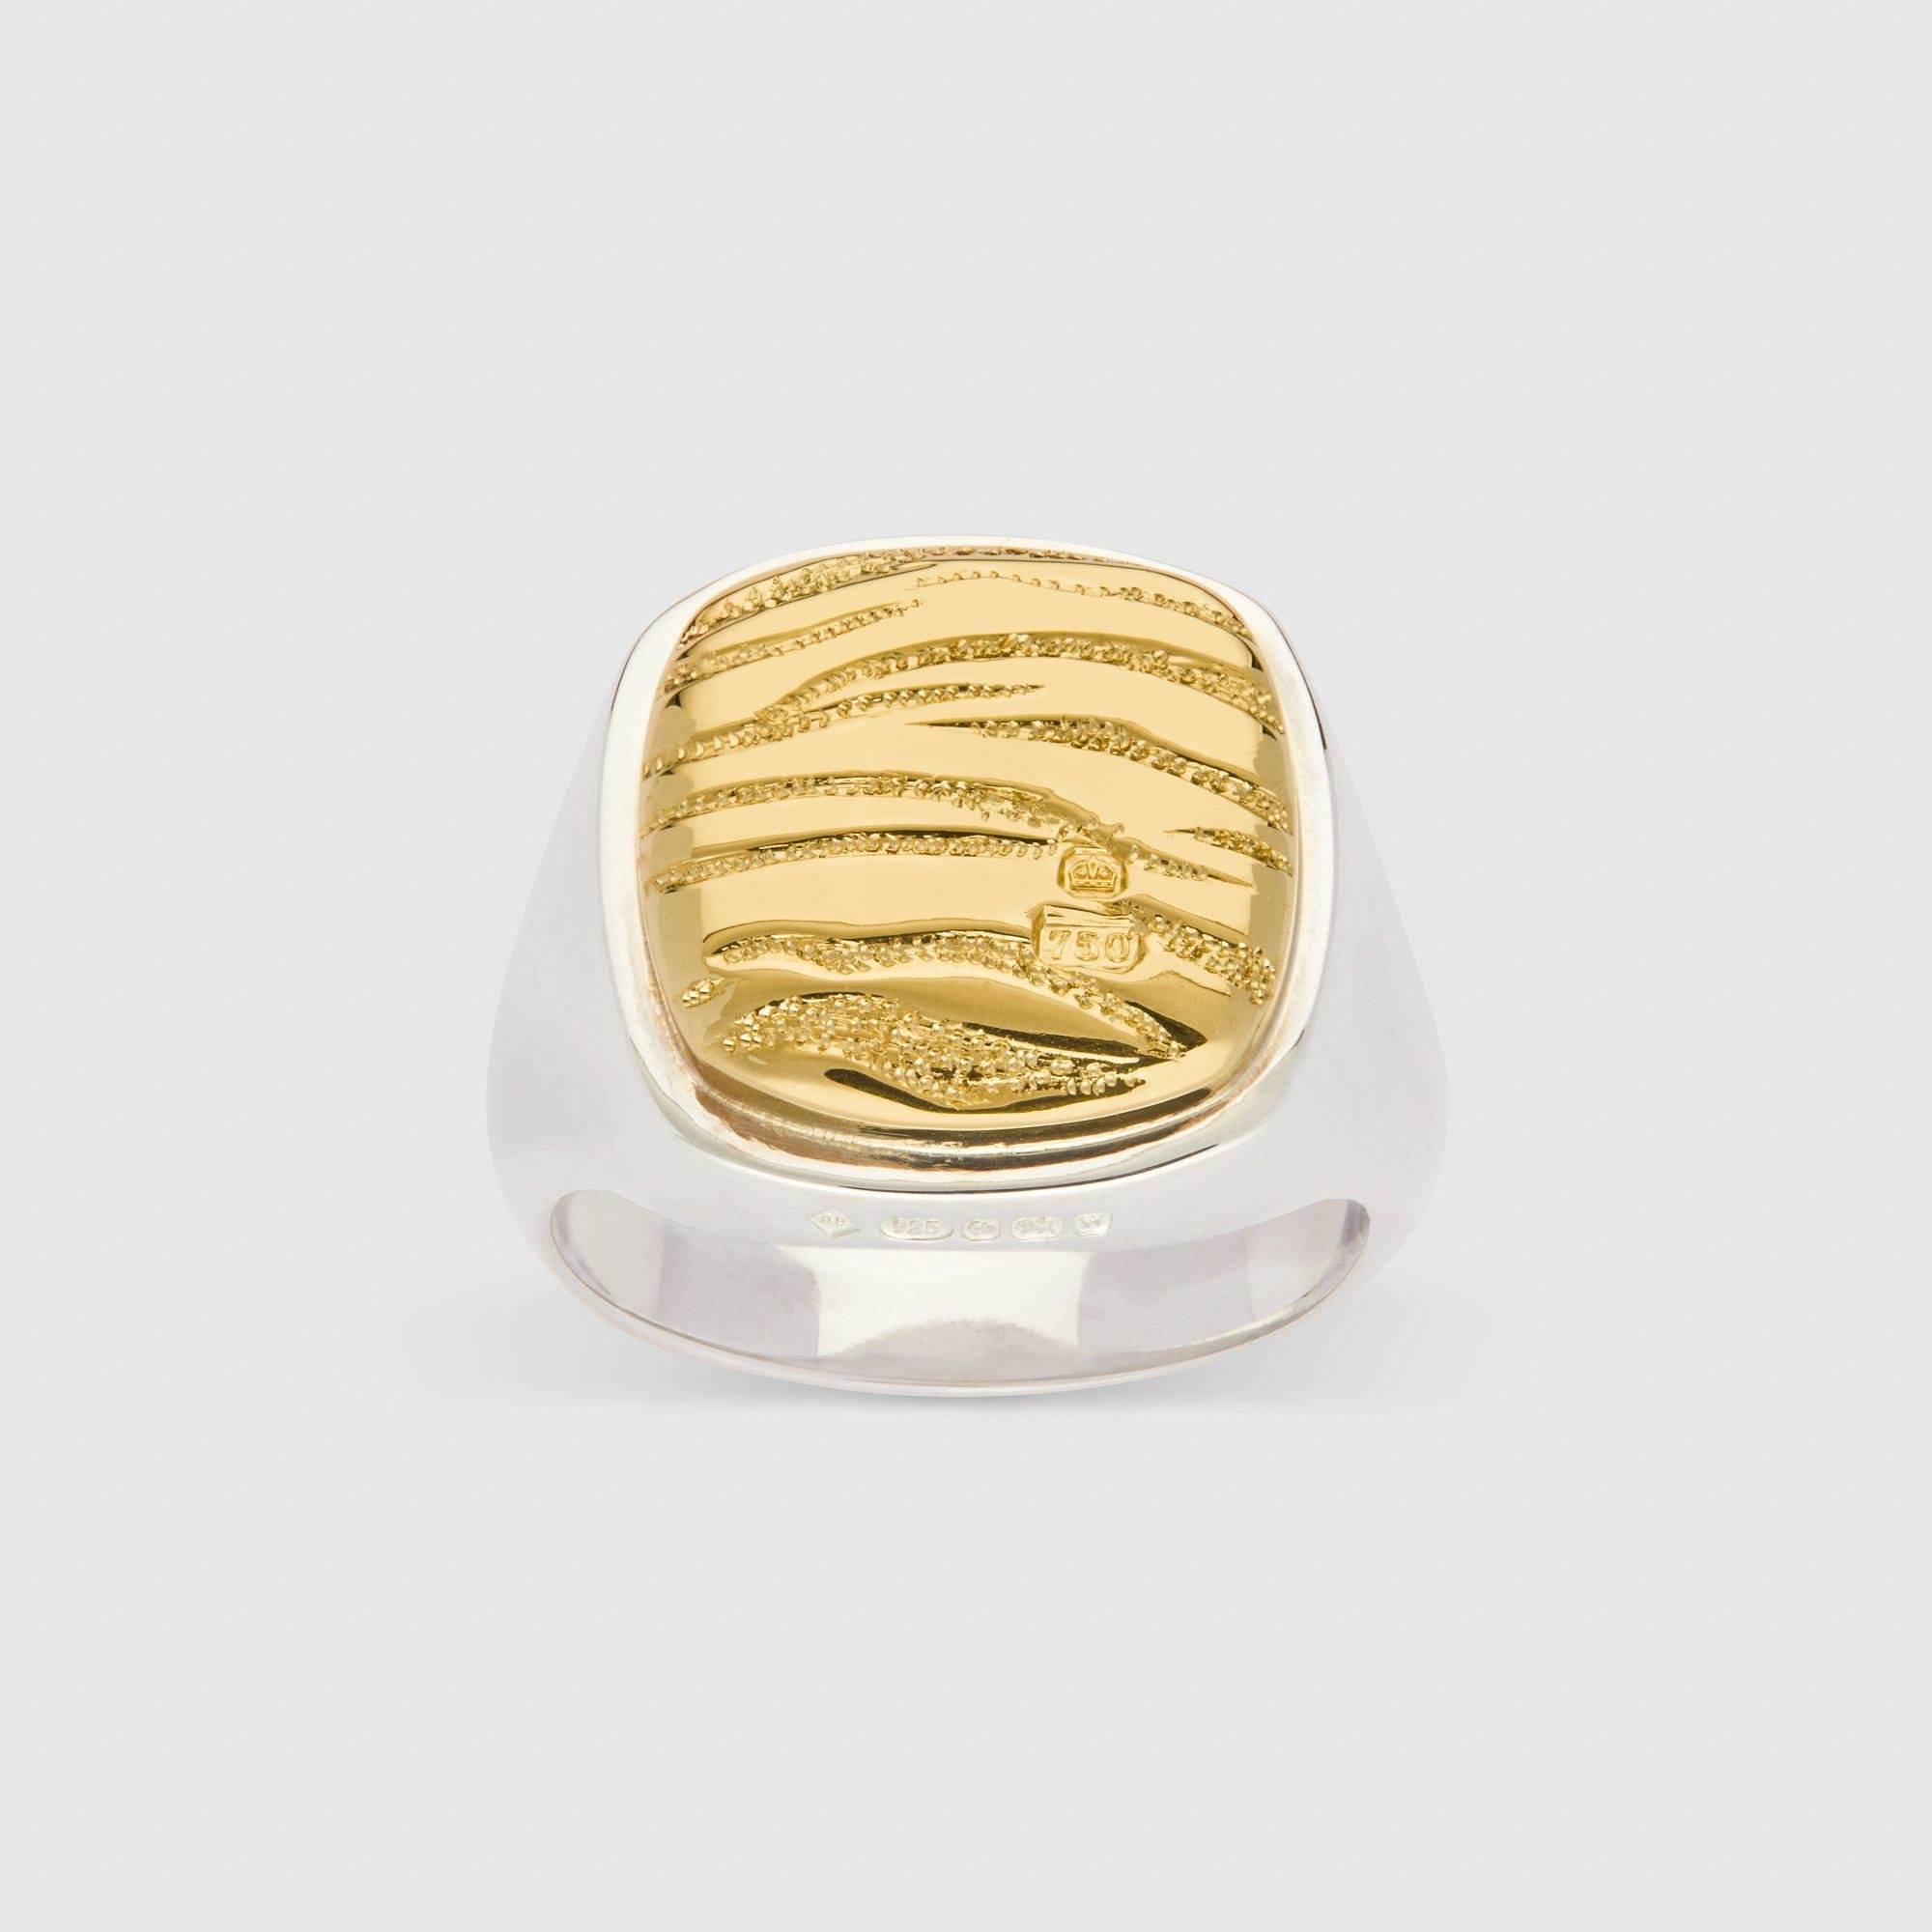 Bunney - DSM Exclusive Heavy Cushion Tiger Signet Ring by BUNNEY